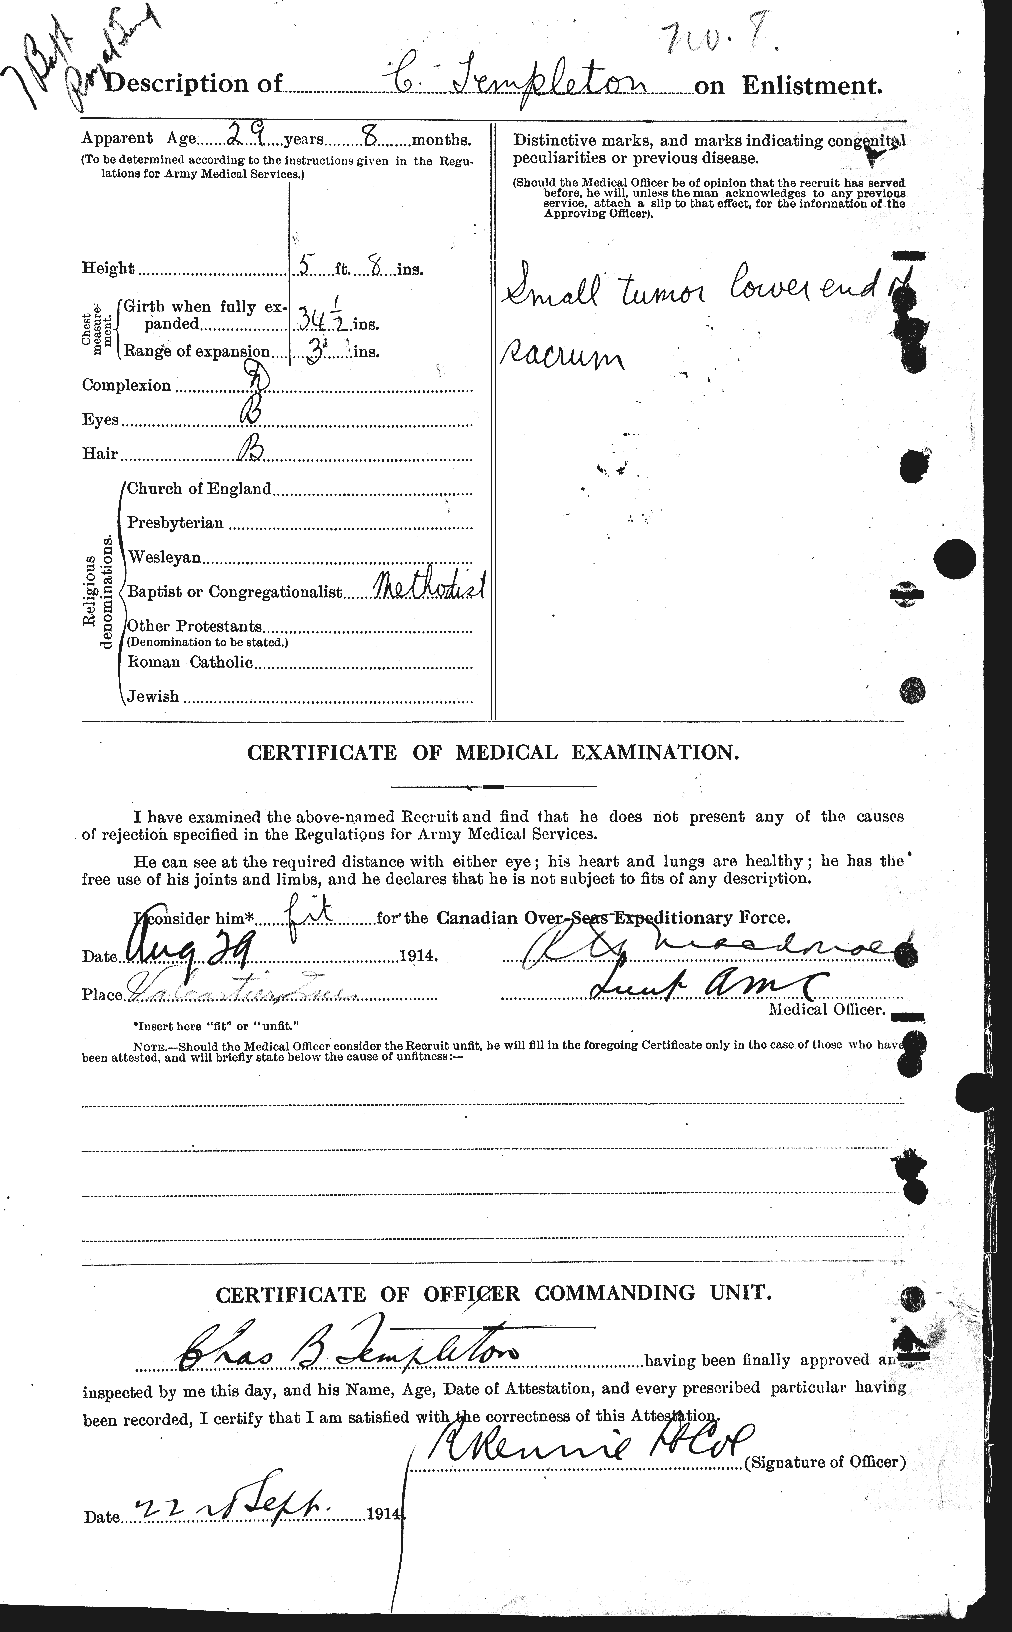 Personnel Records of the First World War - CEF 629146b